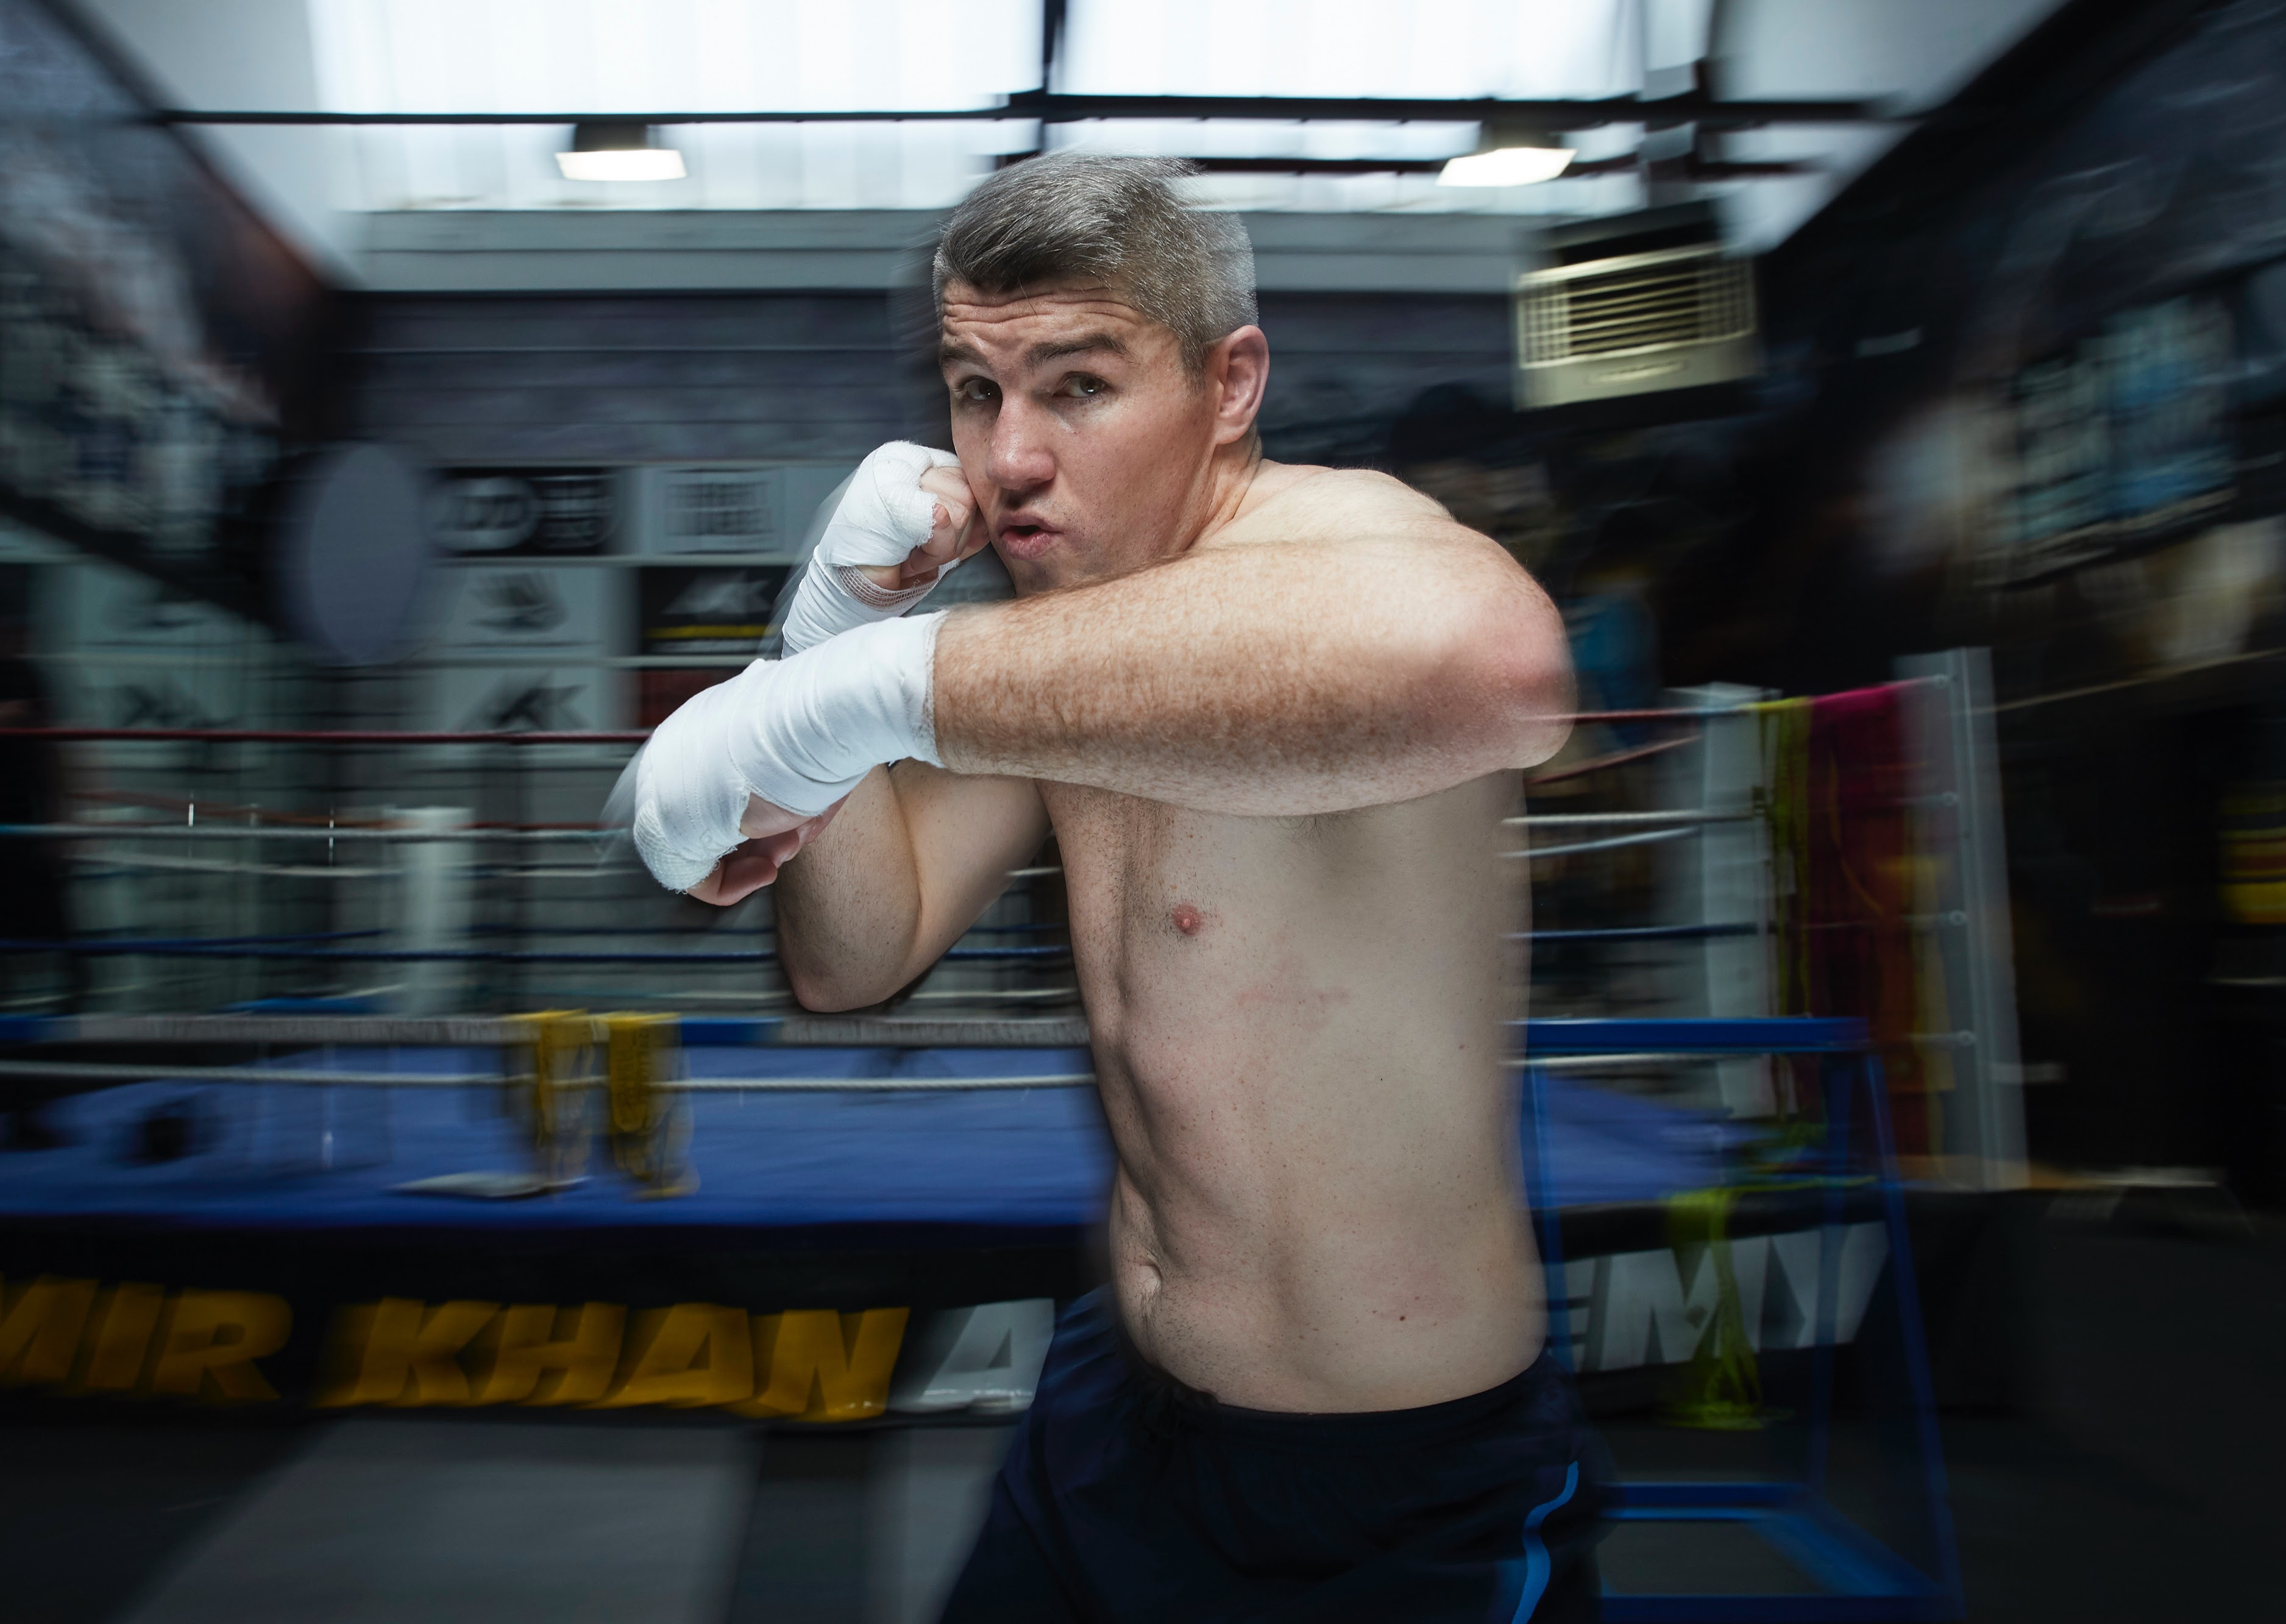 Liam Smith has been vocal about wanting the Kell Brook fight since he has signed with Matchroom Boxing. Credit: Matchroom Boxing.